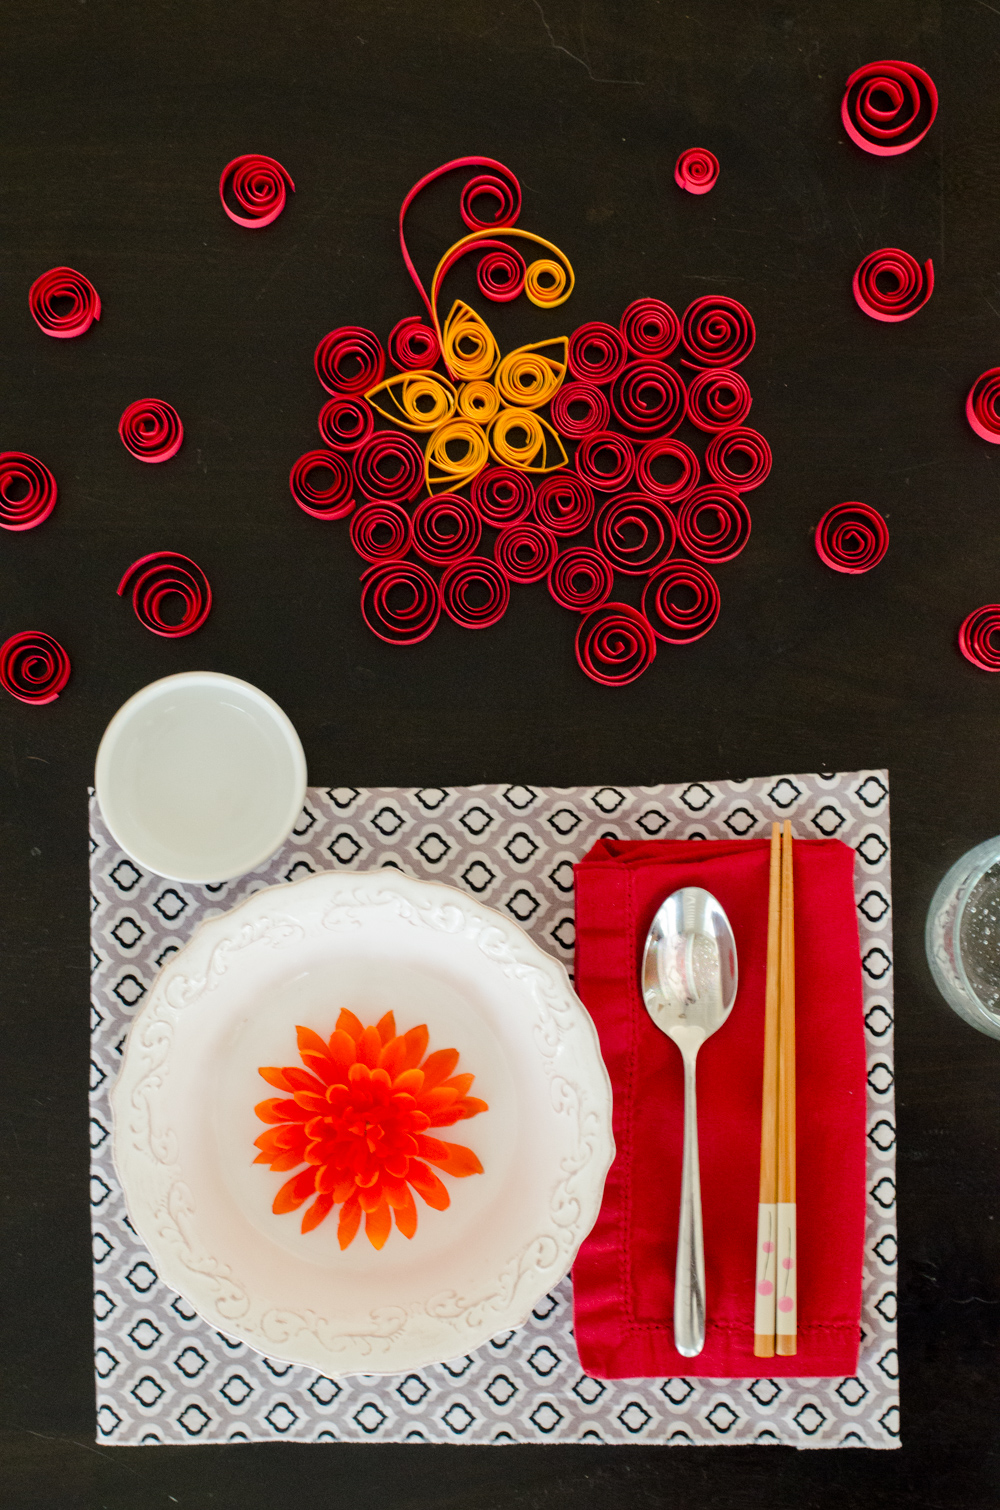 Vietnamese Quilled Tablescape from ChefSarahElizabeth.com